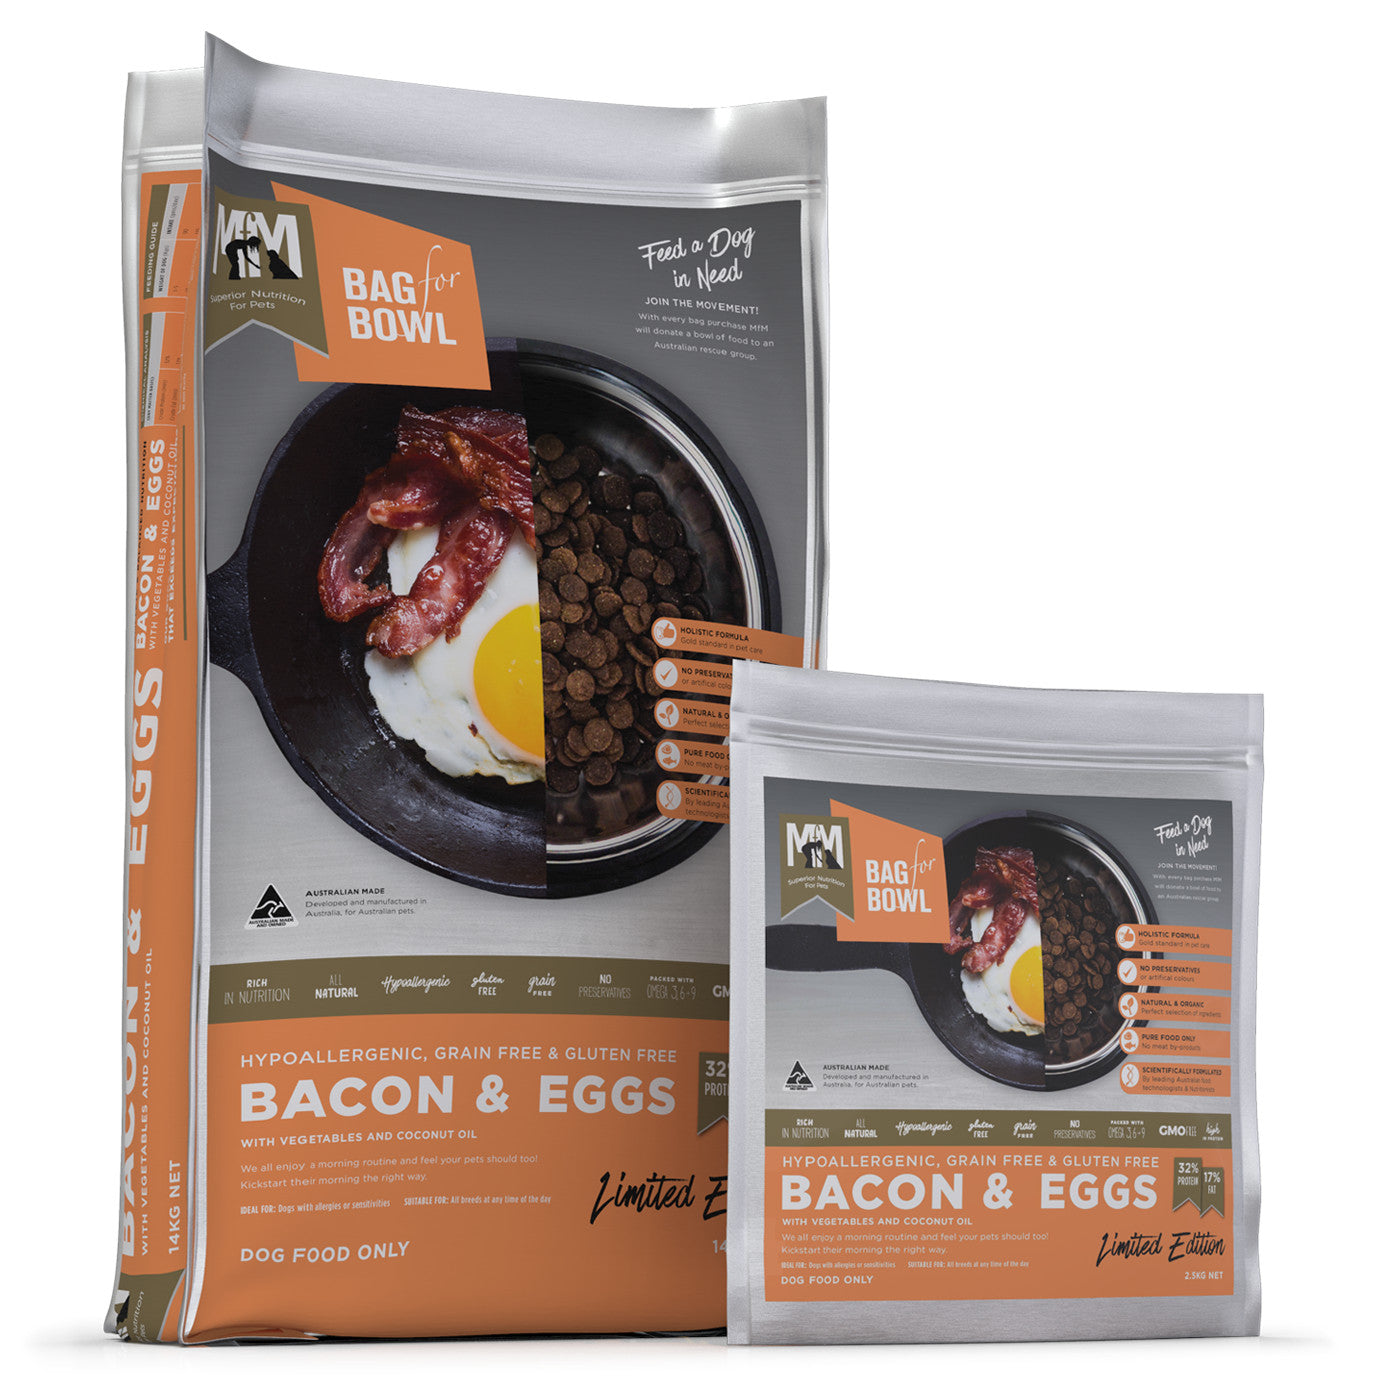 Meals for Mutts Grain Free Bacon & Eggs Dry Dog Food.